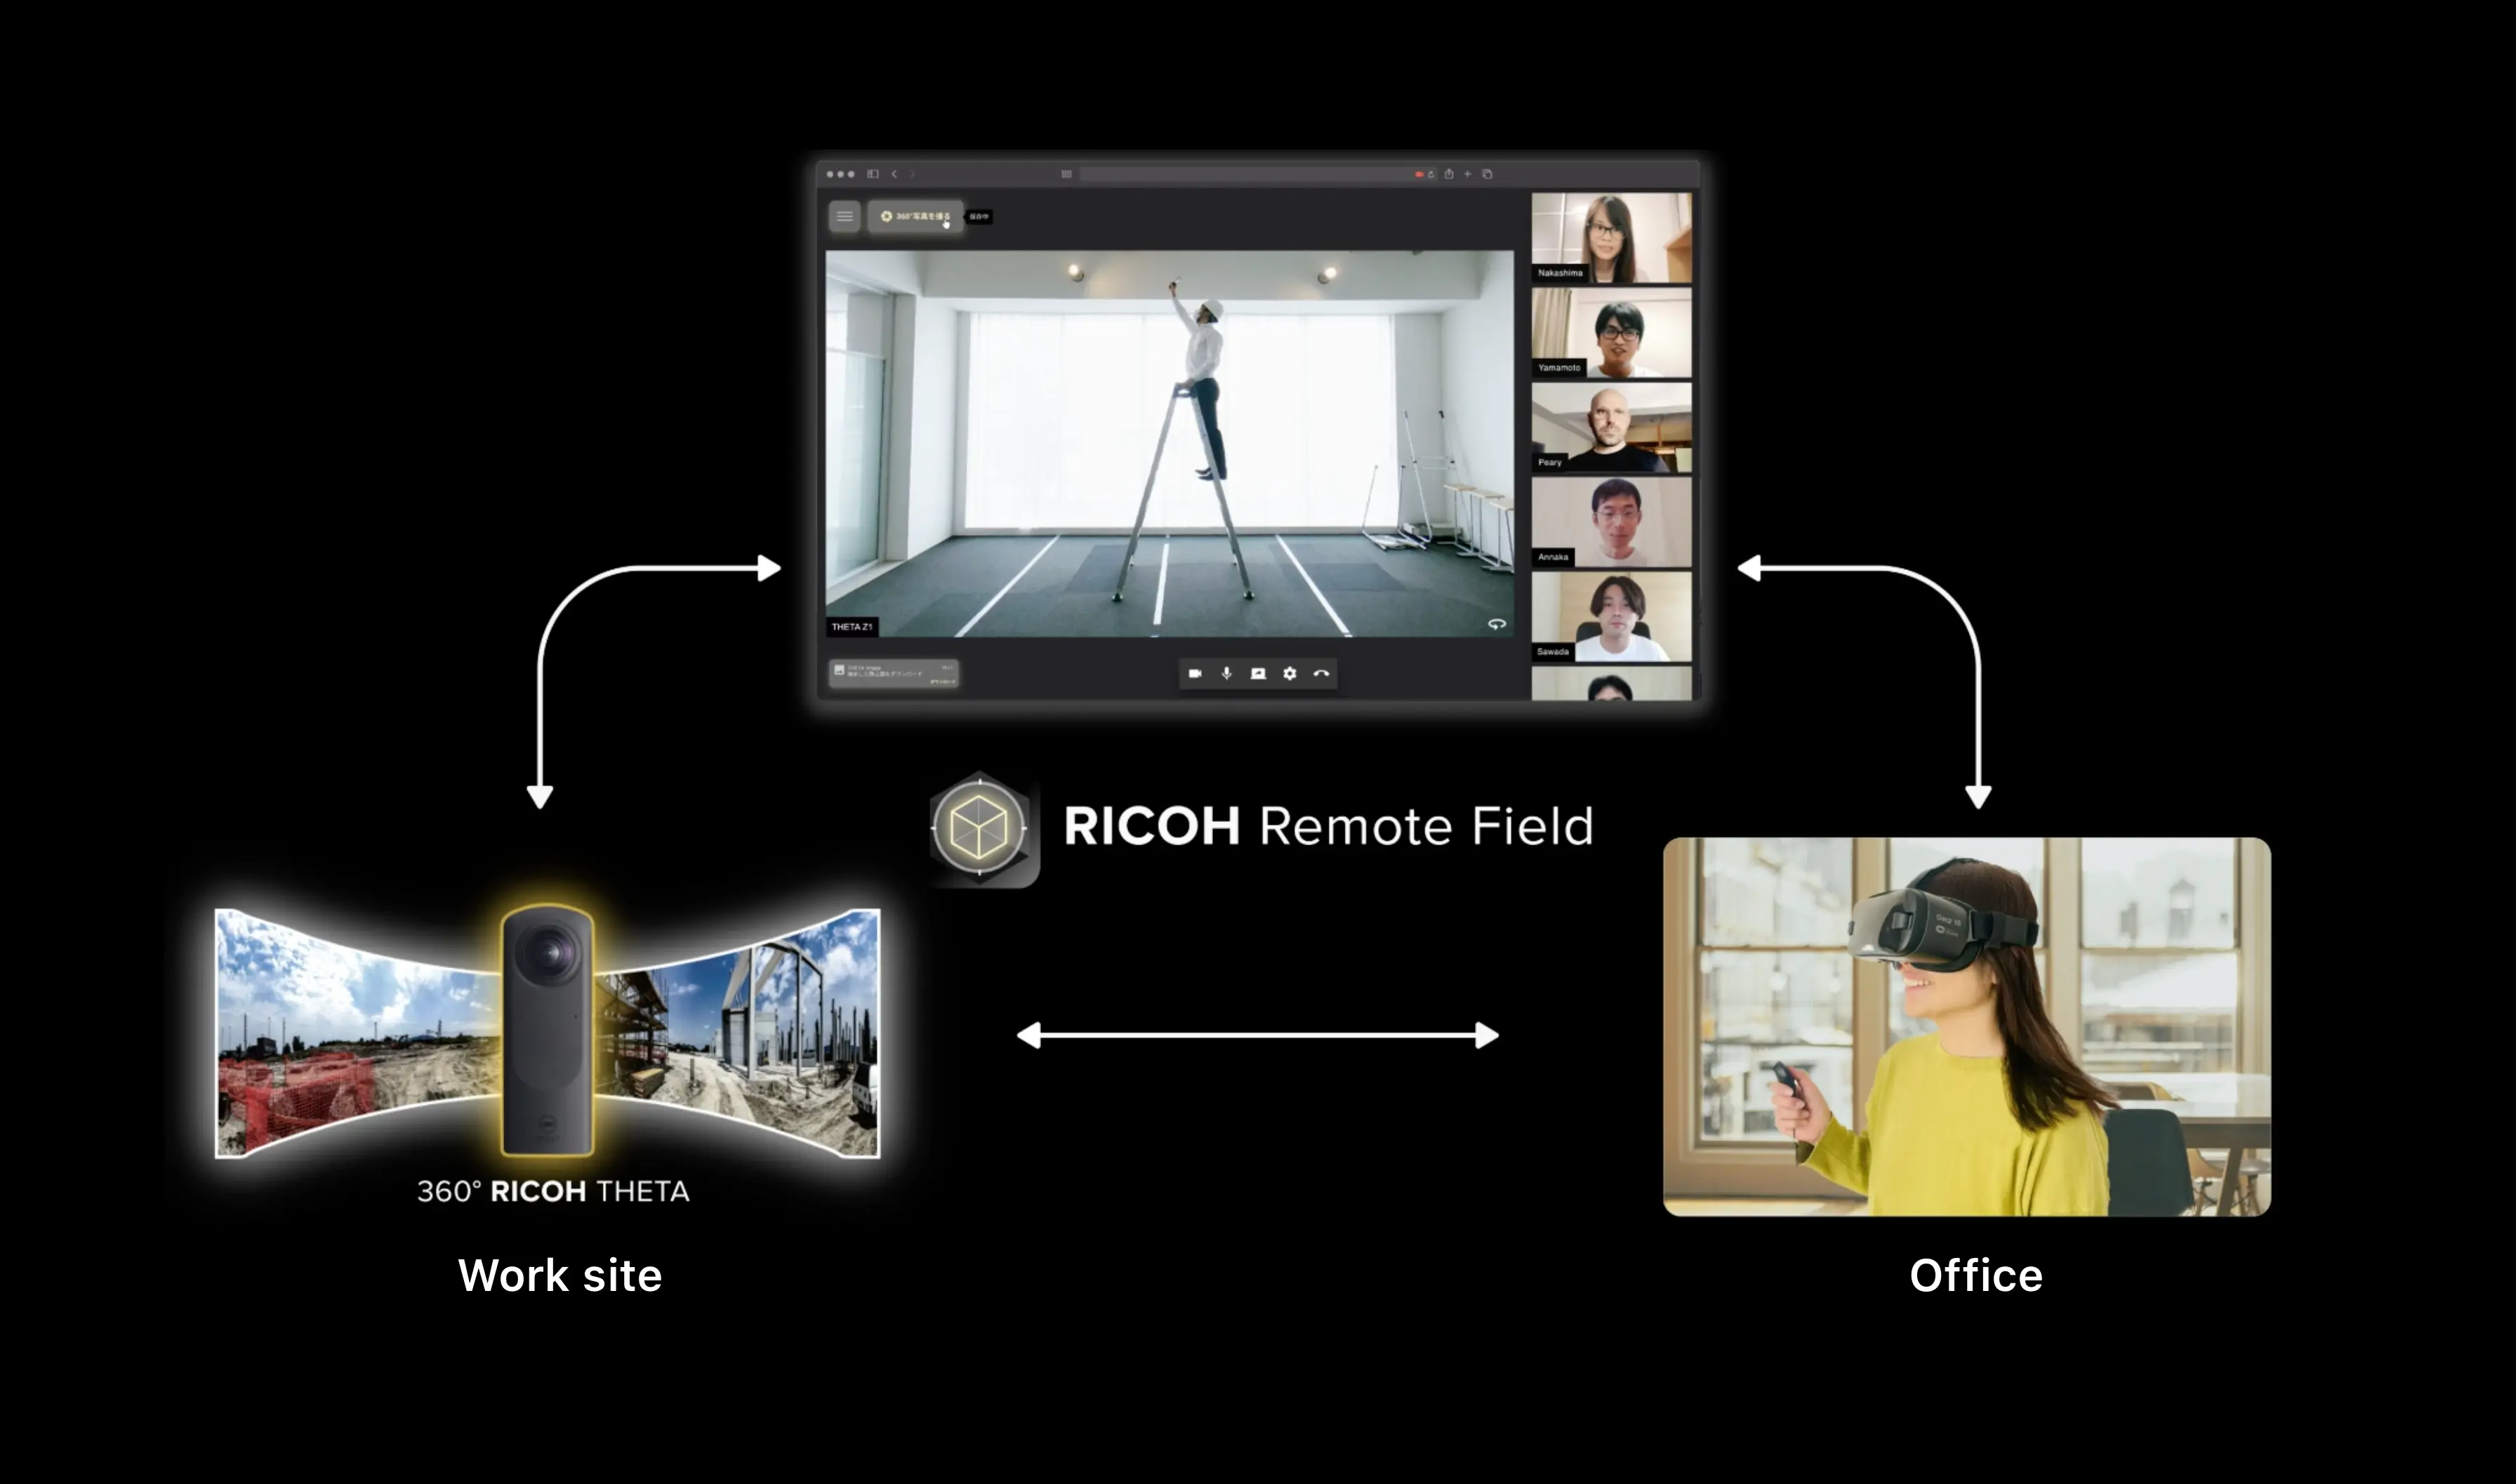 Streaming on site with the RICOH Remote Field